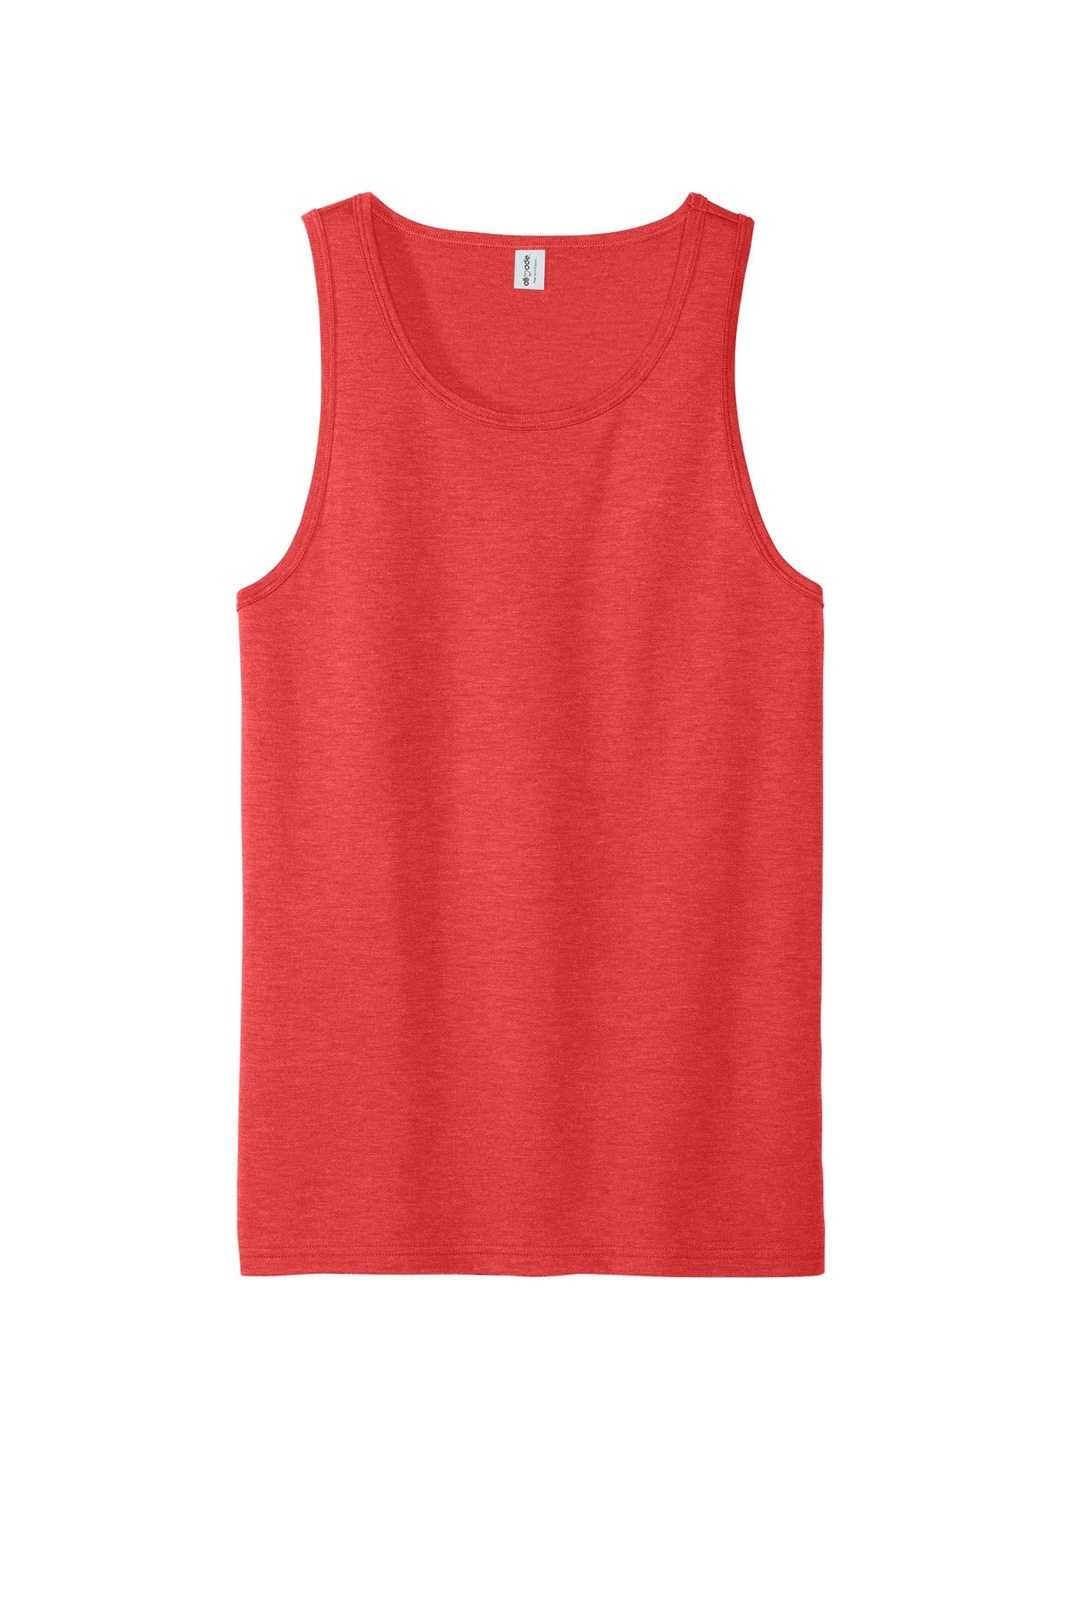 AllMade AL2019 Unisex Tri-Blend Tank - Rise Up Red - HIT a Double - 2